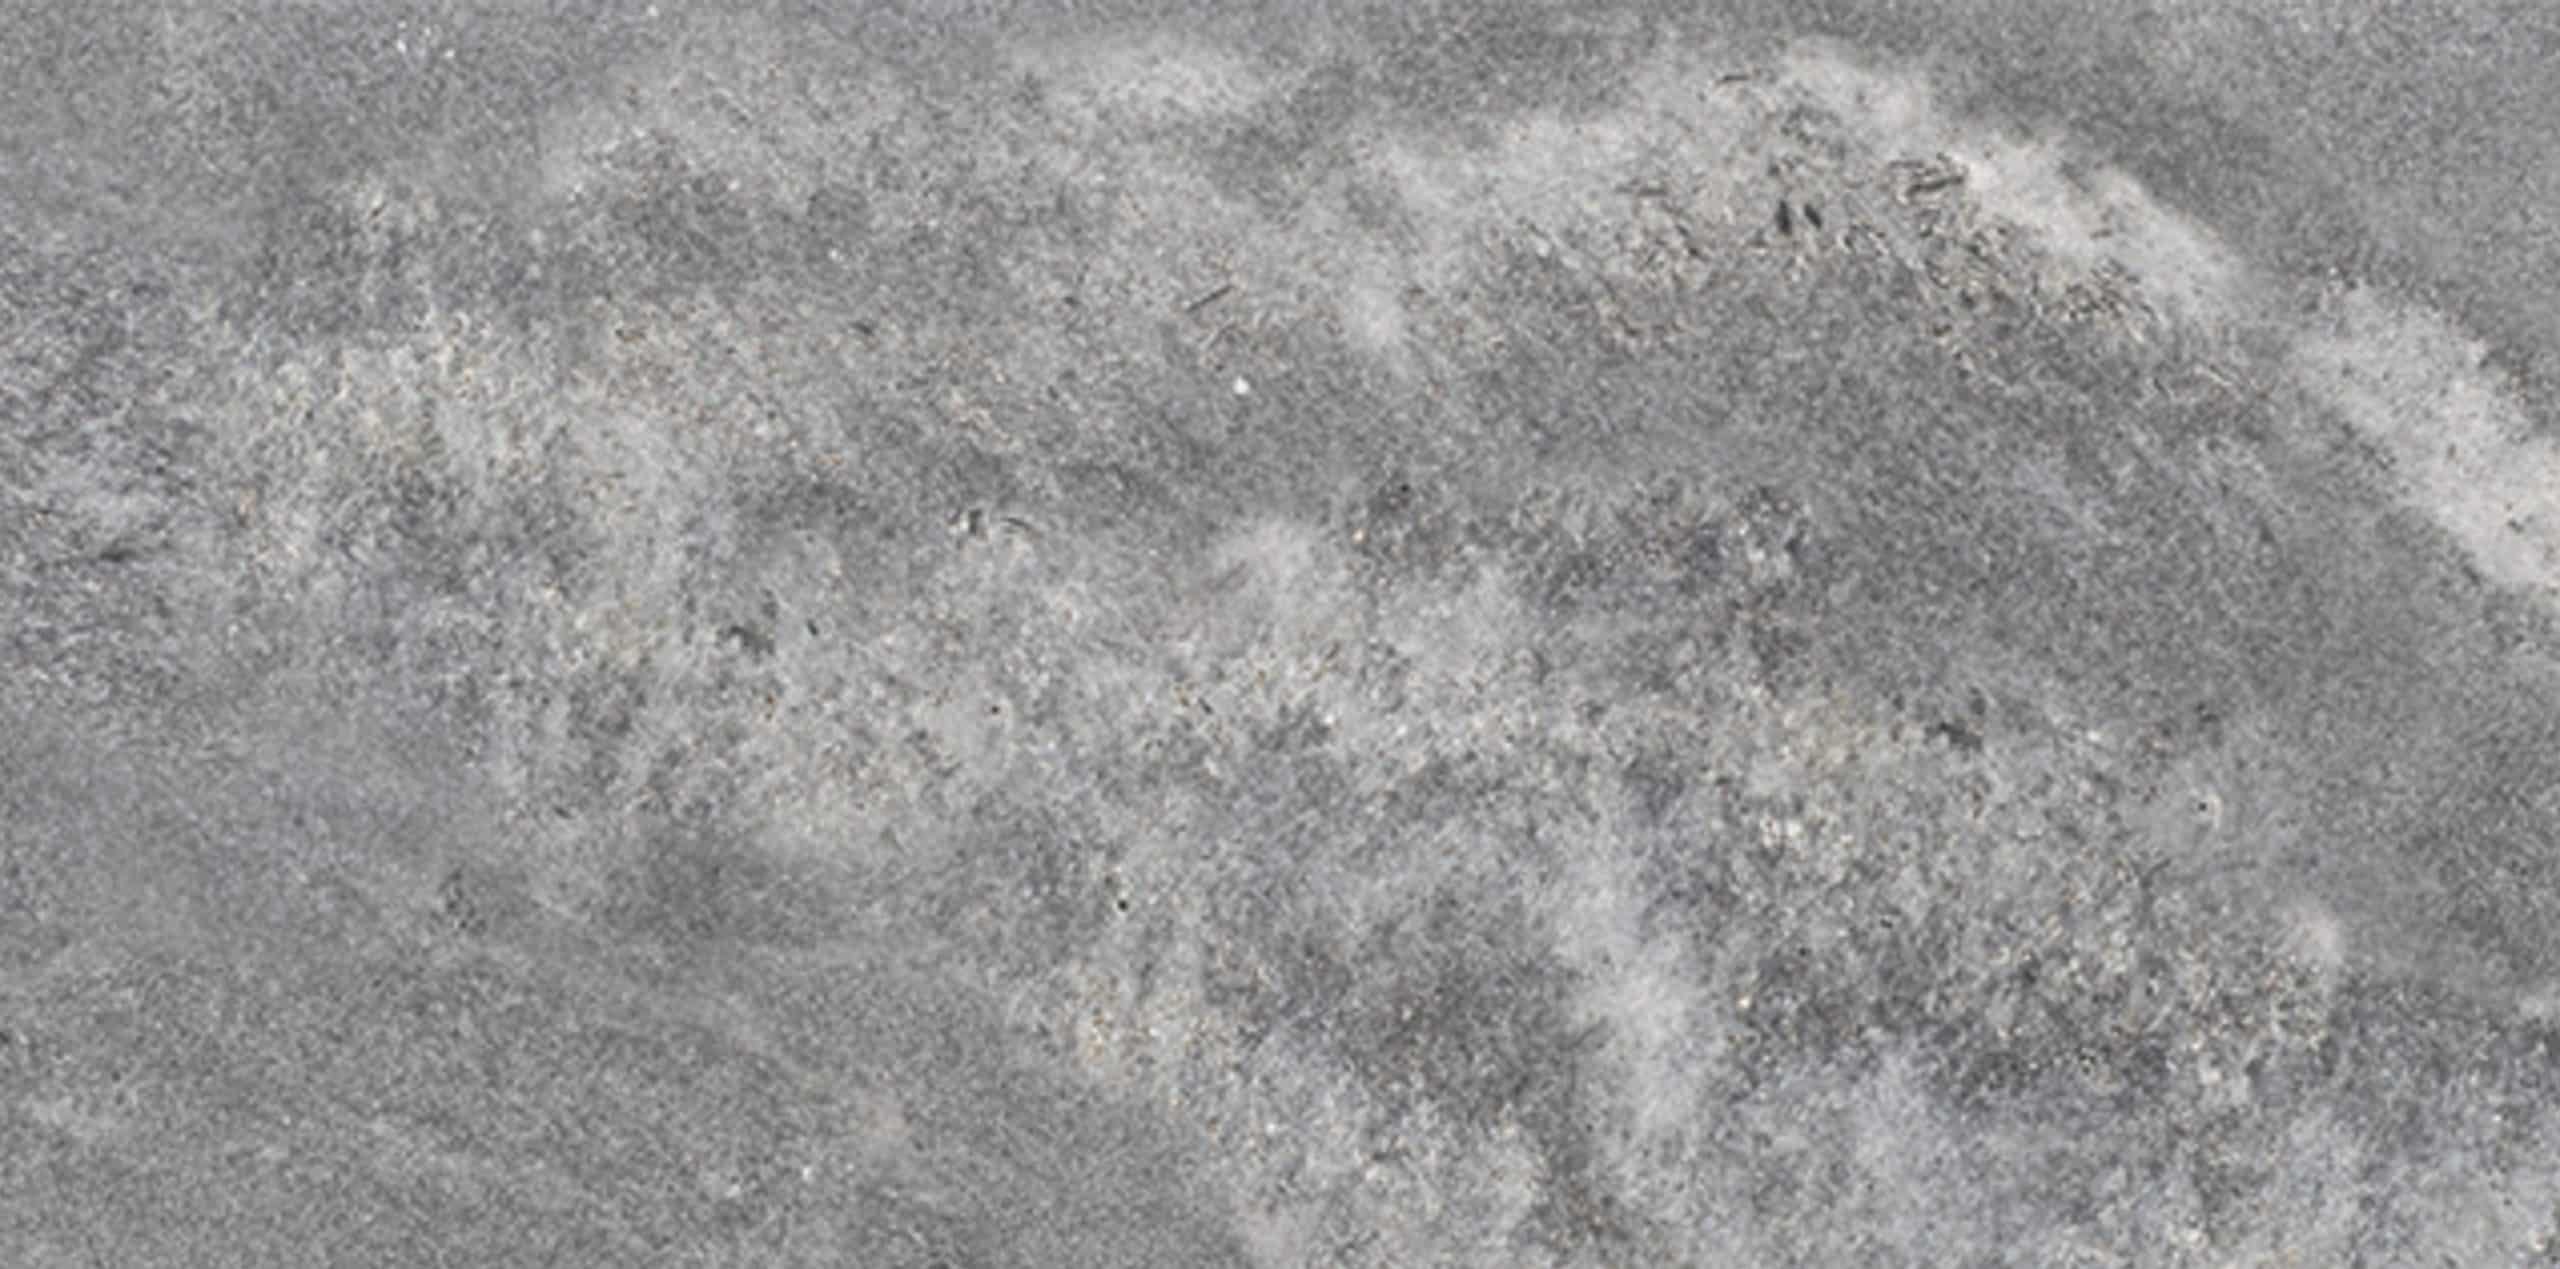 Scirocco - a beautifully textured stone tile with a mix of warm and cool tones.